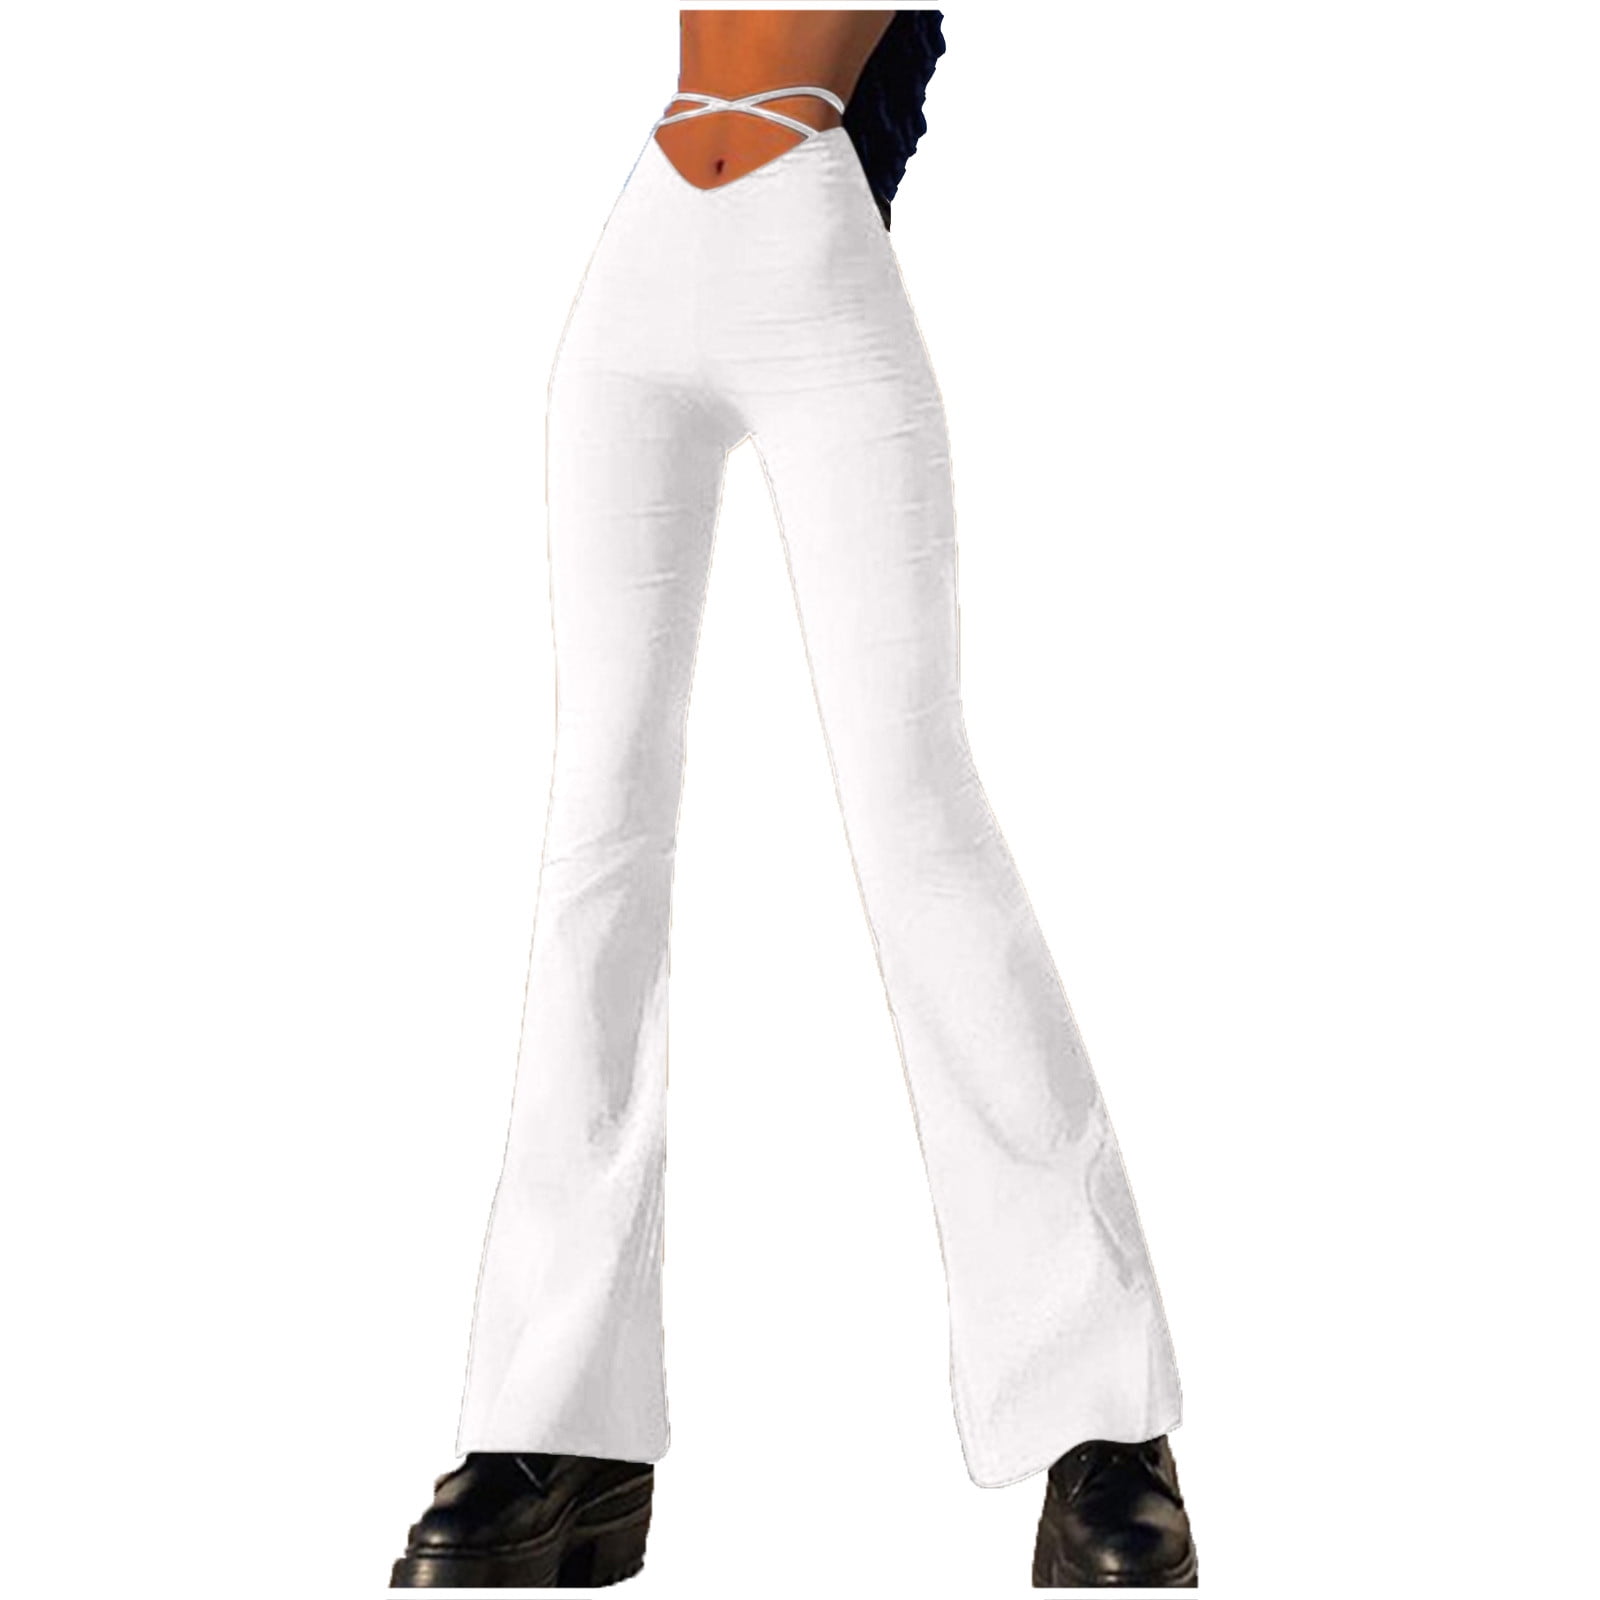 Buy White Trousers & Pants for Women by WUXI Online | Ajio.com